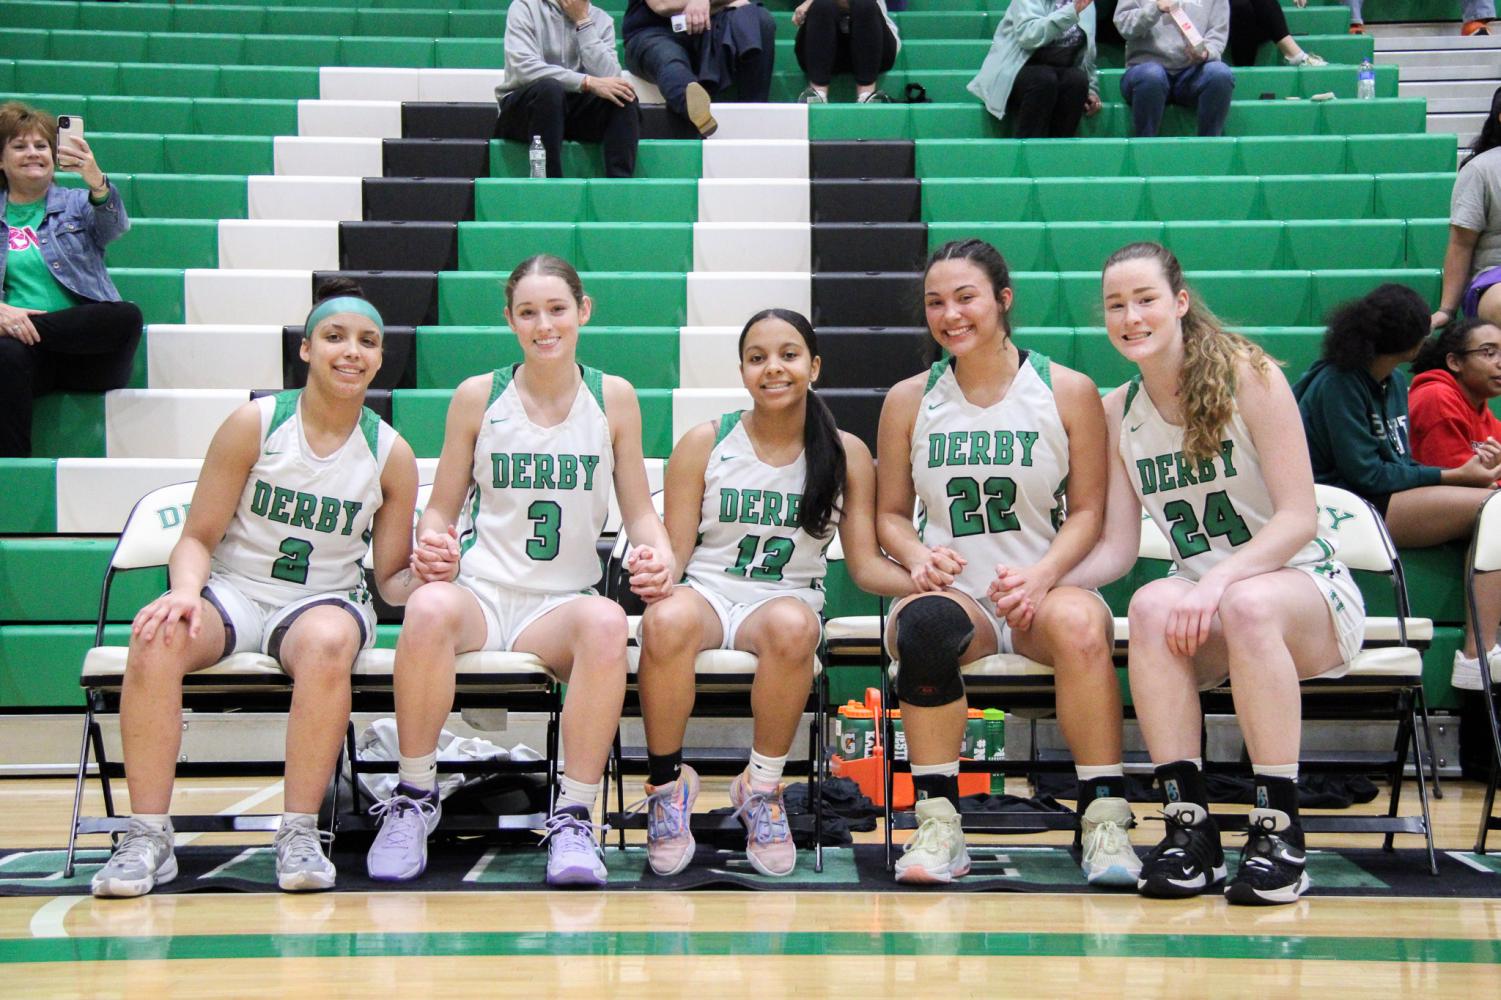 Girls+basketball+sub-state+semi+finals+V.+Lawrence+Free+State+%28Photos+by+Sophia+Edmonson%29